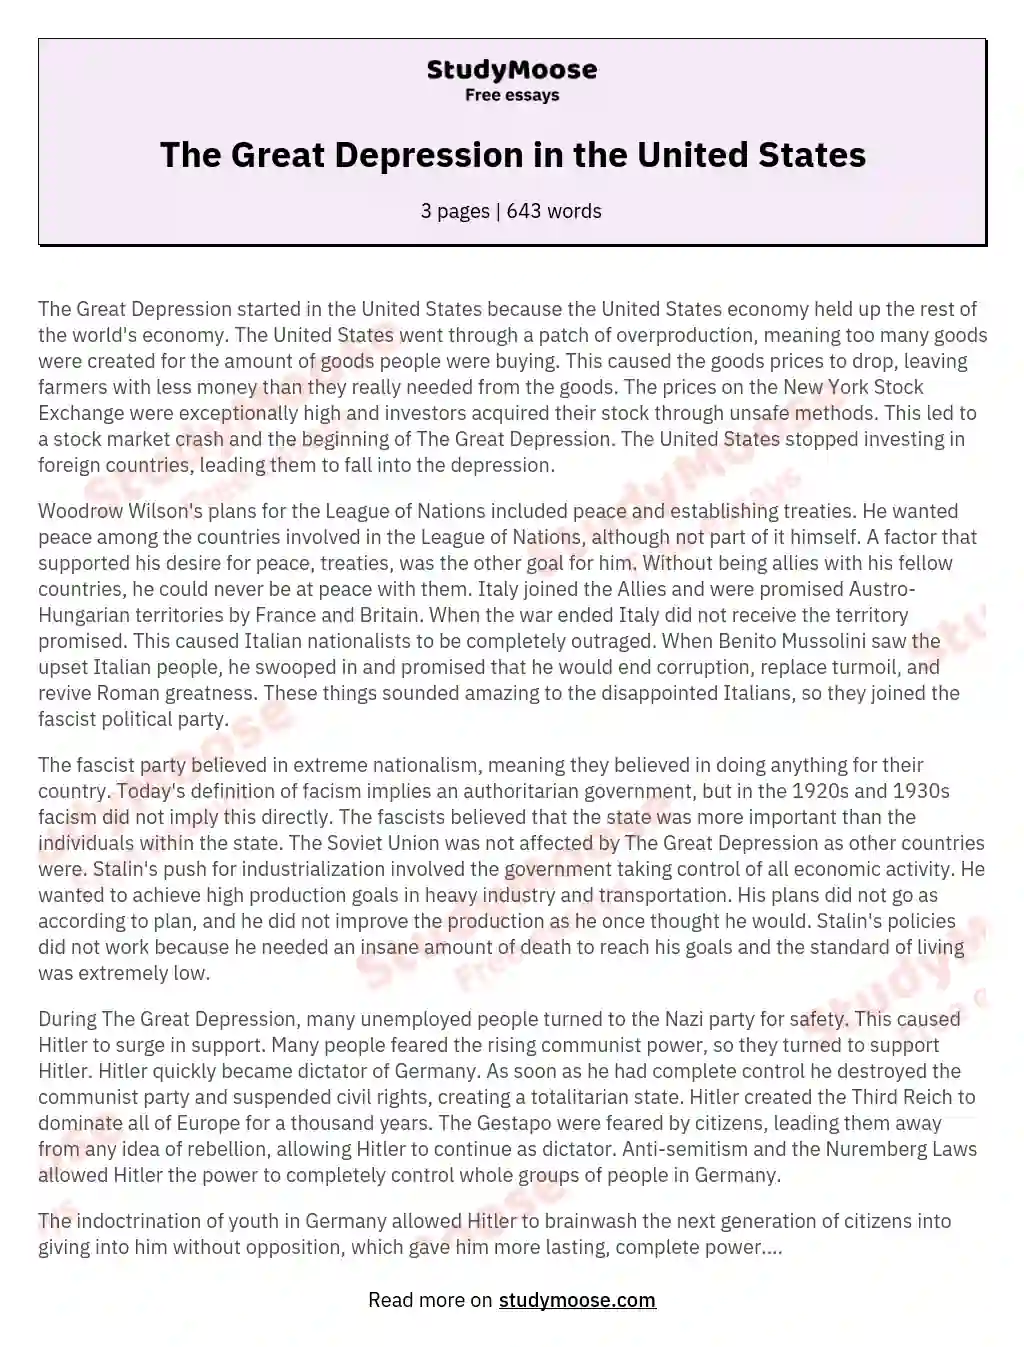 The Great Depression in the United States essay